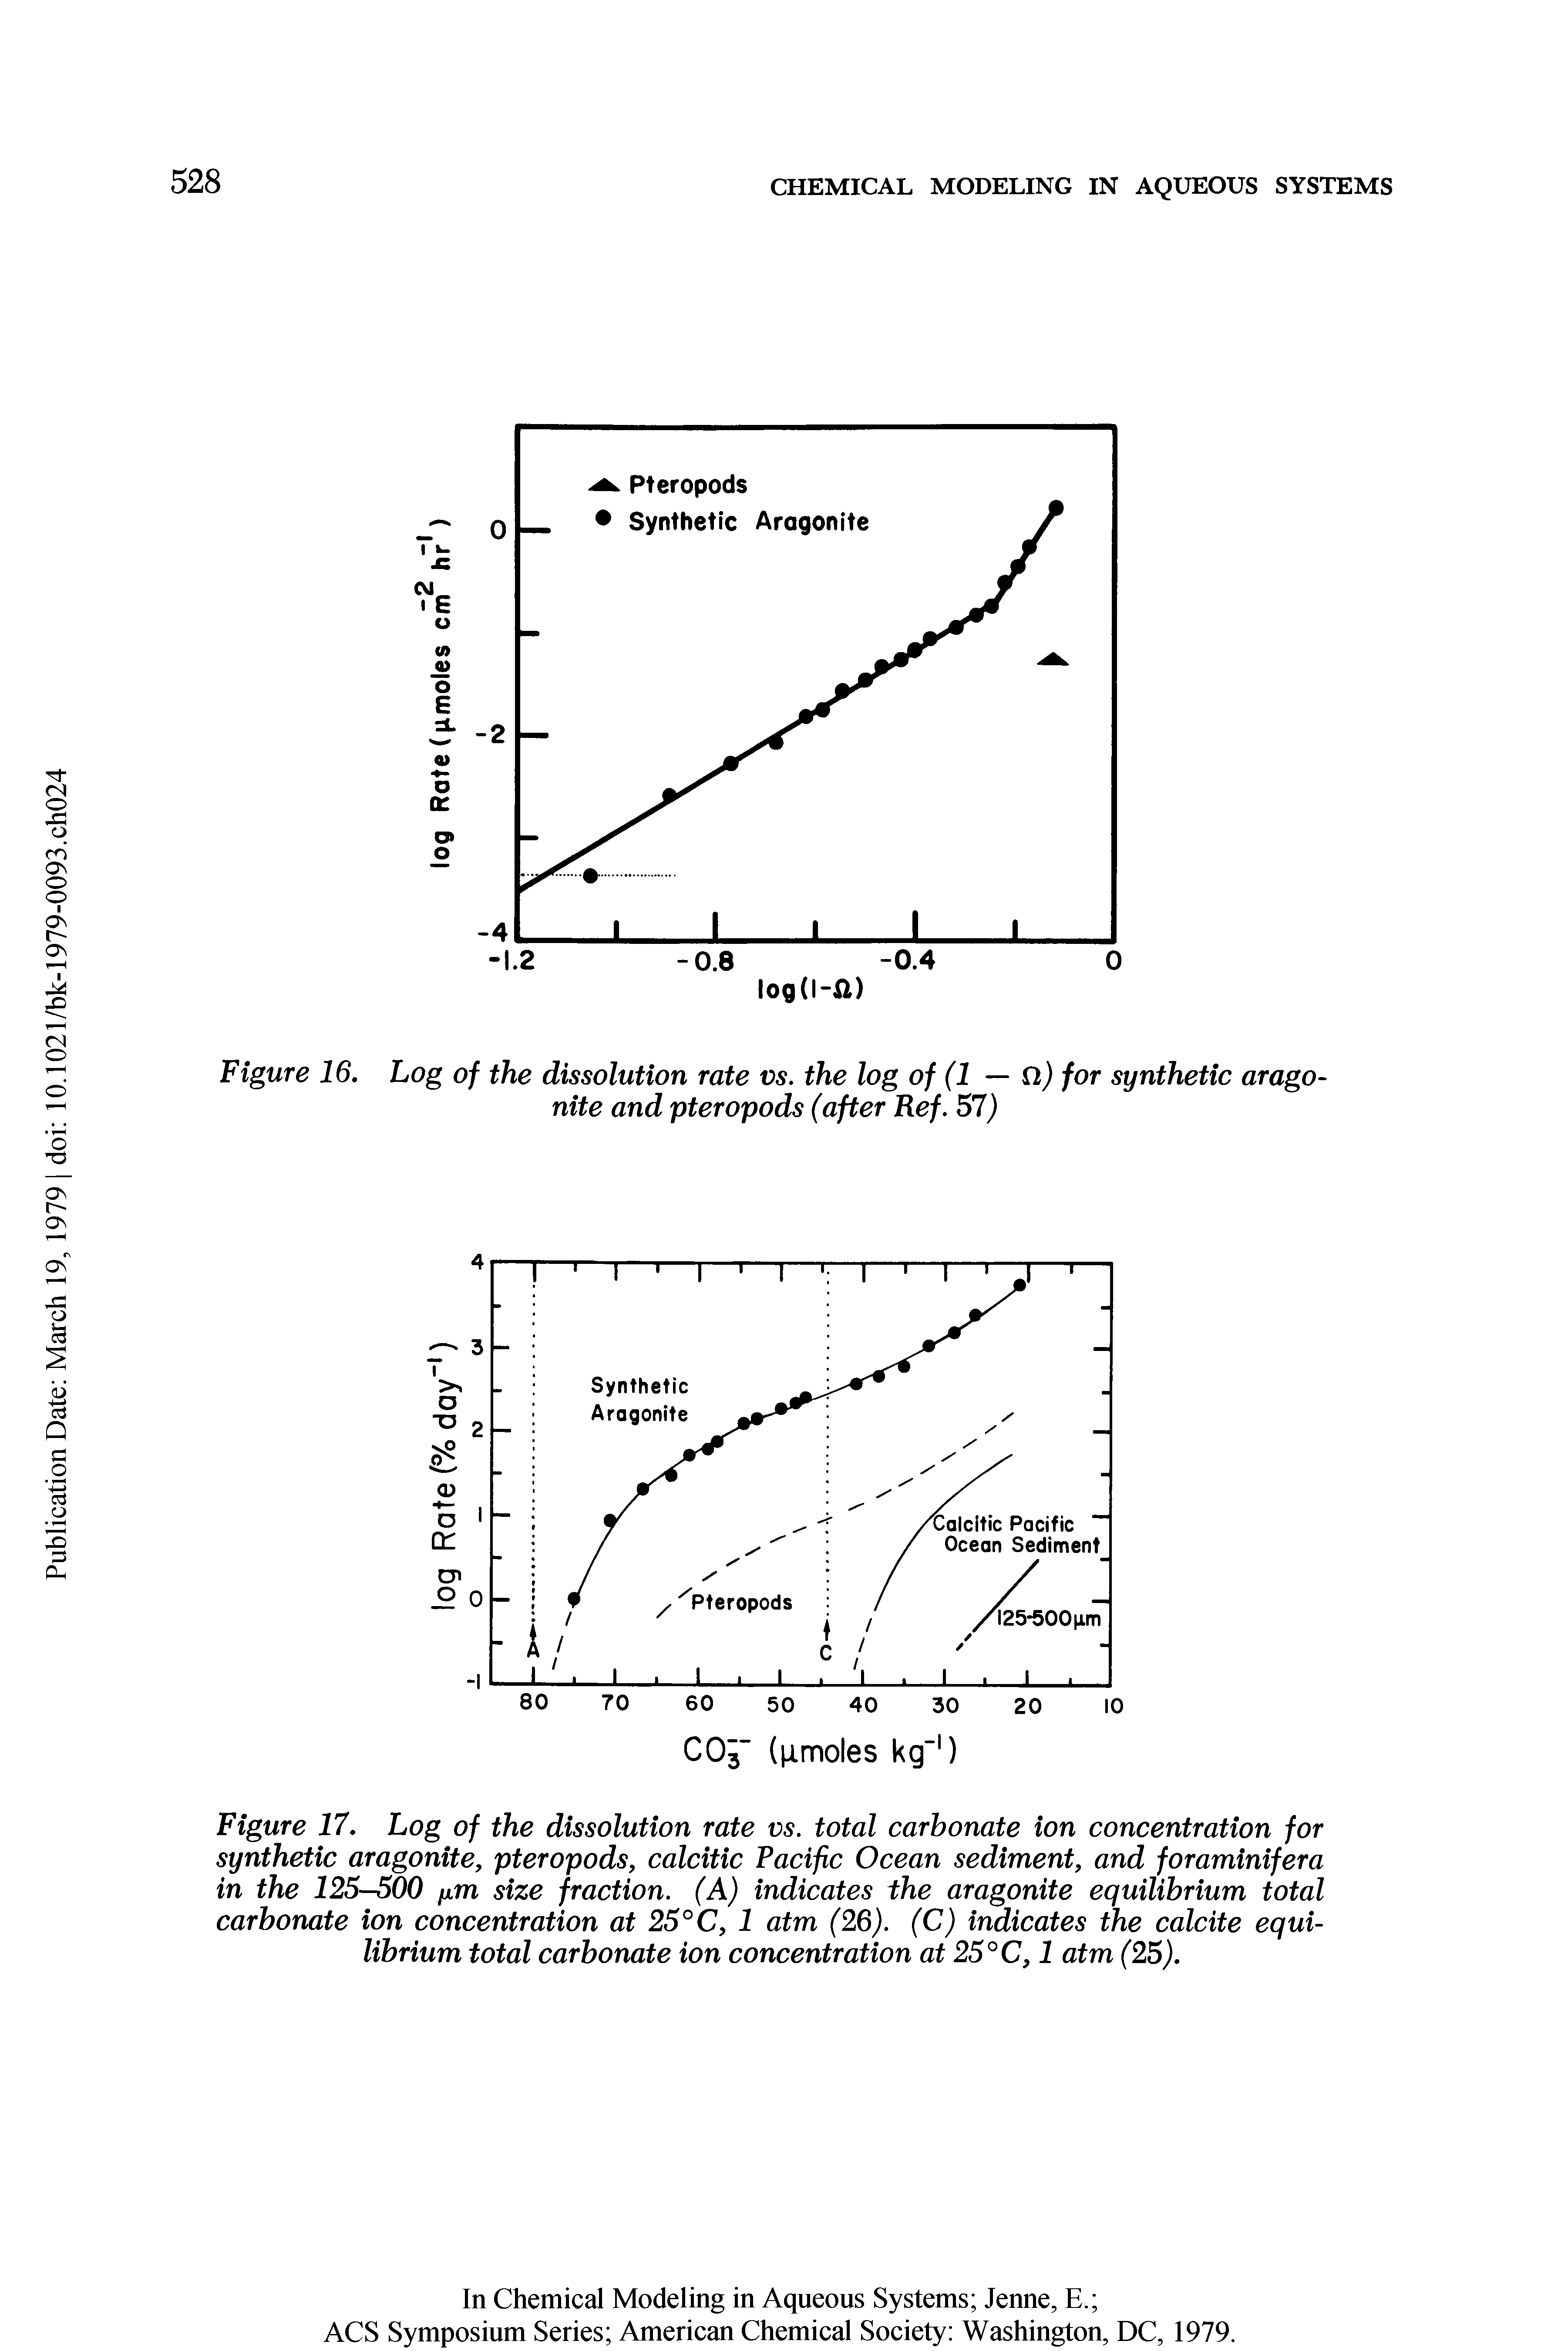 Figure 17. Log of the dissolution rate vs. total carbonate ion concentration for synthetic aragonite, pteropods, calcitic Pacific Ocean sediment, and foraminifera in the 125-500 iim size fraction. (A) indicates ihe aragonite equilibrium total carbonate ion concentration at 25°C, 1 atm (26). (C) indicates the calcite equilibrium total carbonate ion concentration at 25°C, 1 atm (25).